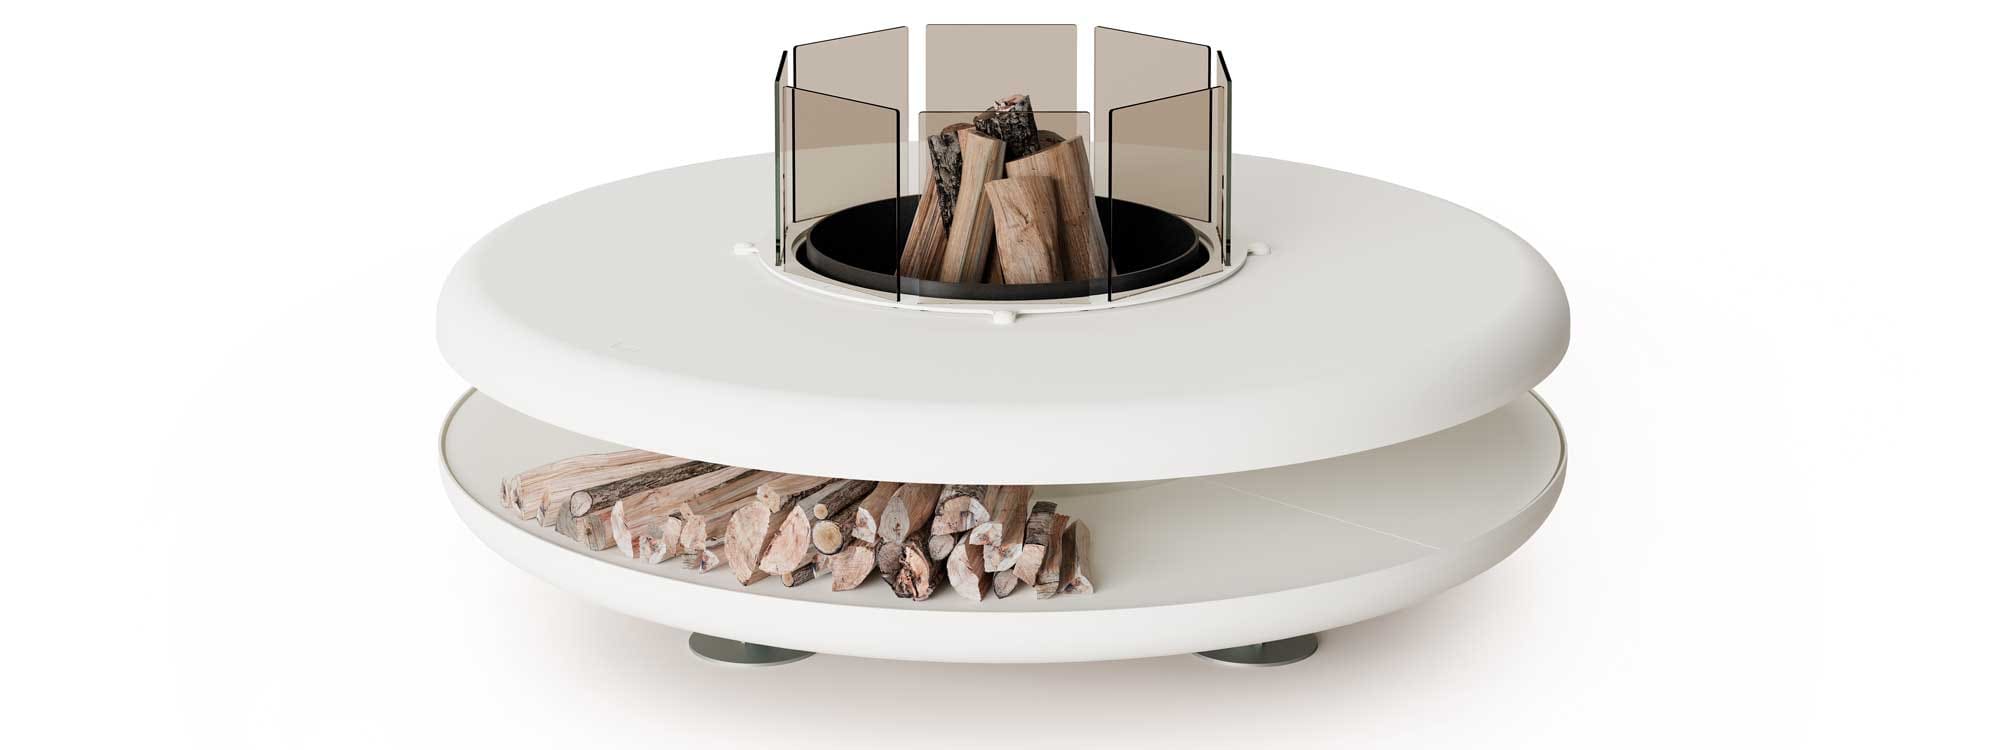 Studio image of Moon large round fire pit with smoked toughened glass spark guard panels by AK47 Design, Italy.